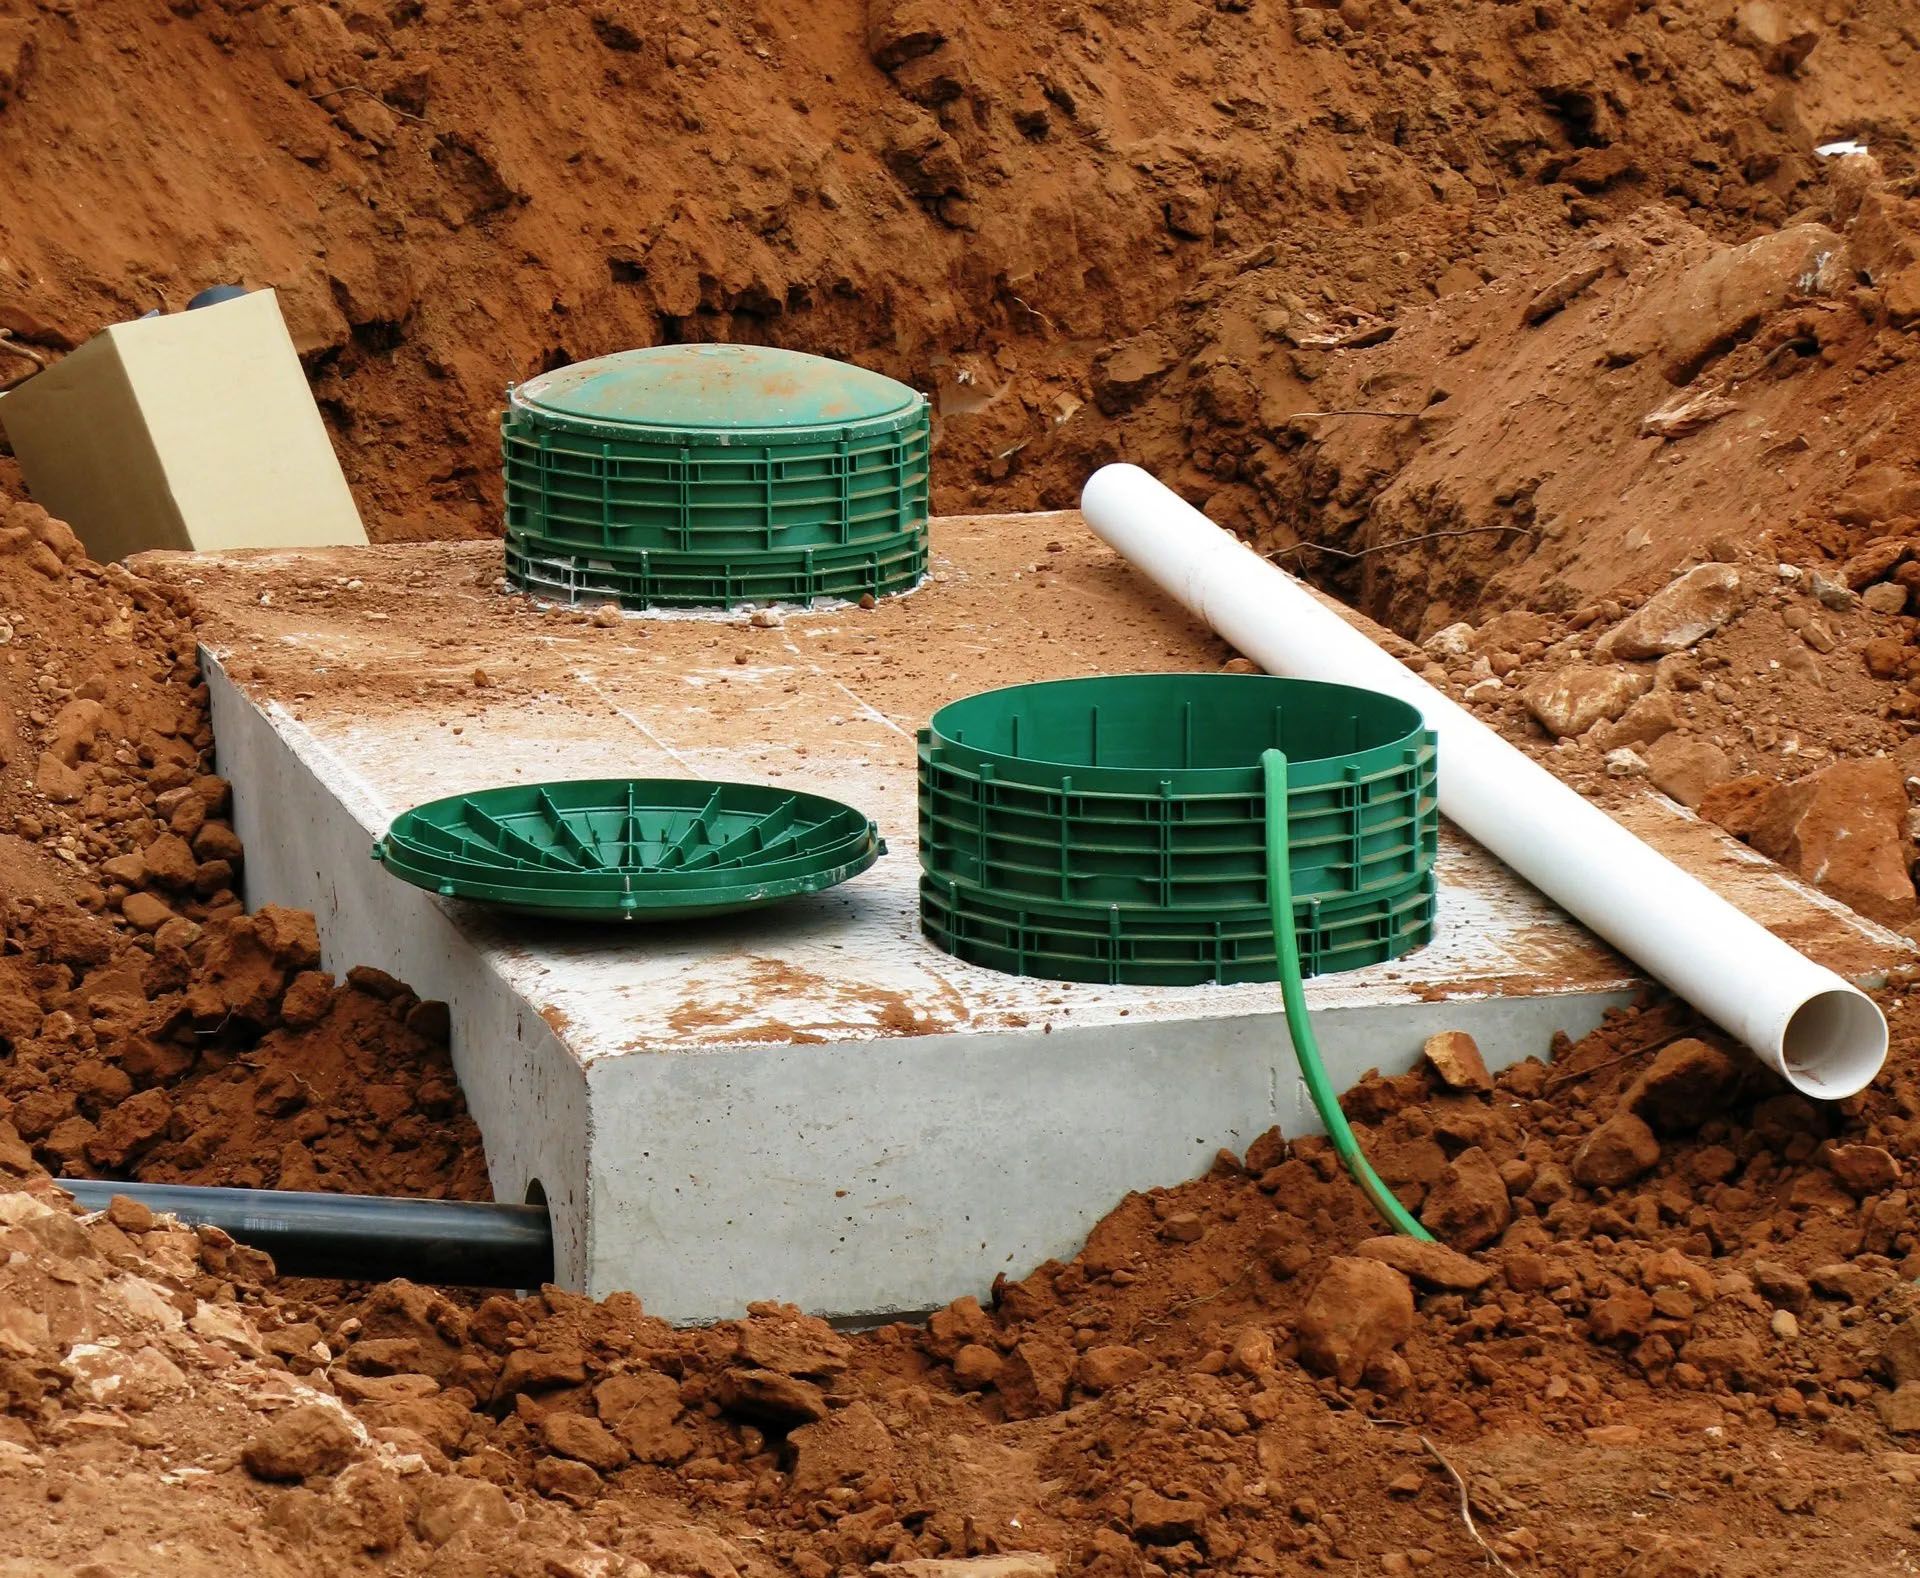 Inner workings of a septic system in Baltimore, MD